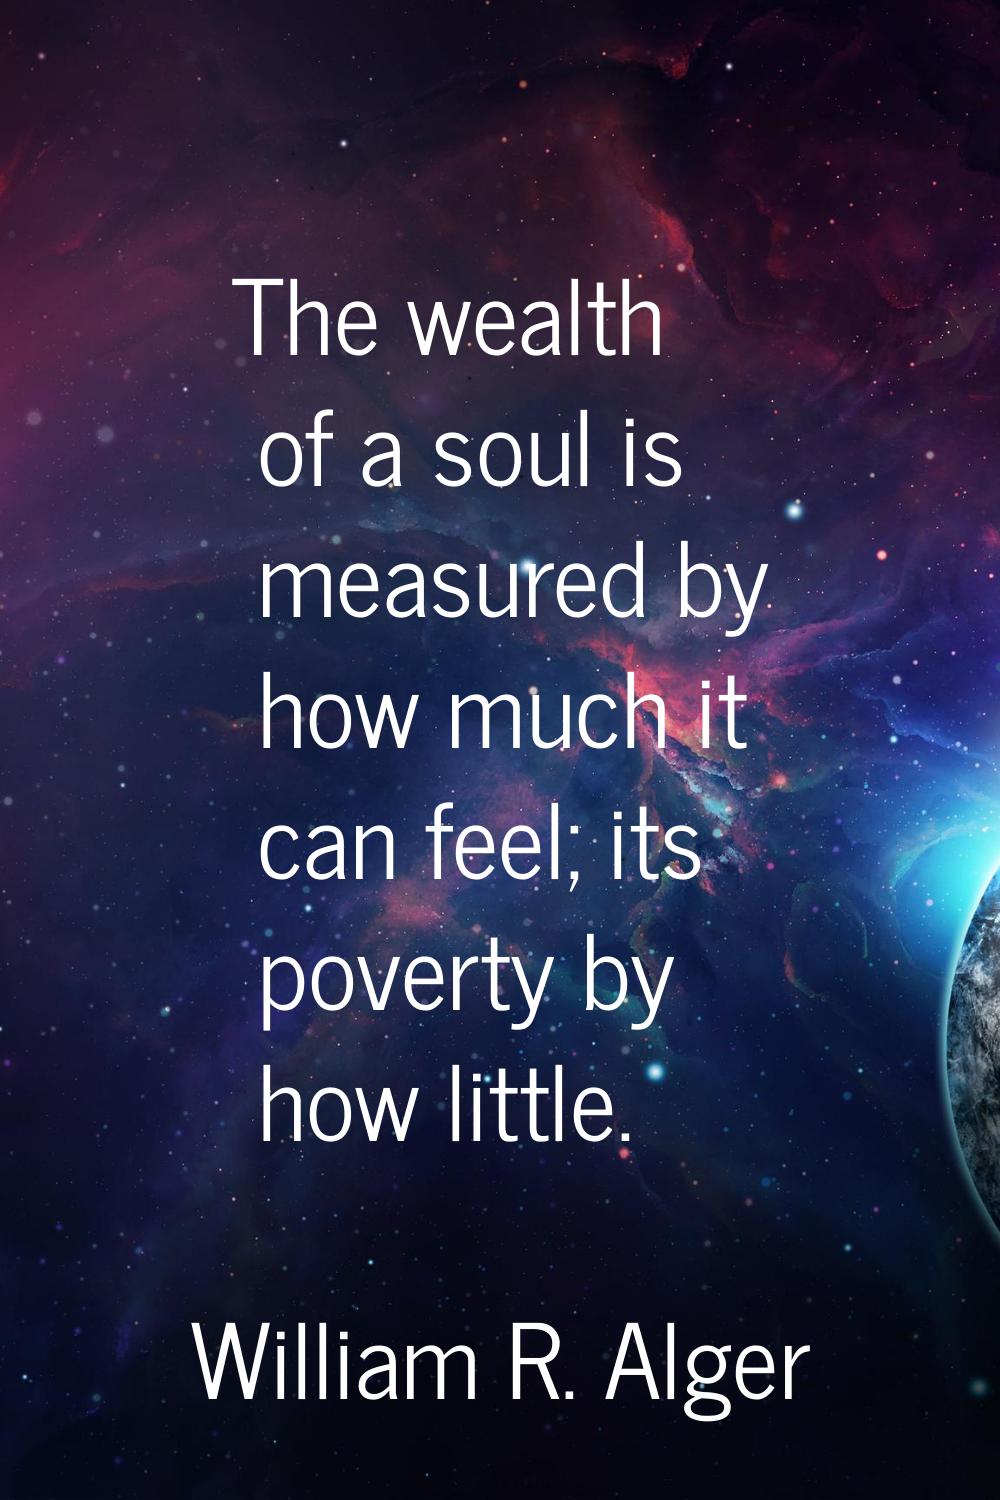 The wealth of a soul is measured by how much it can feel; its poverty by how little.